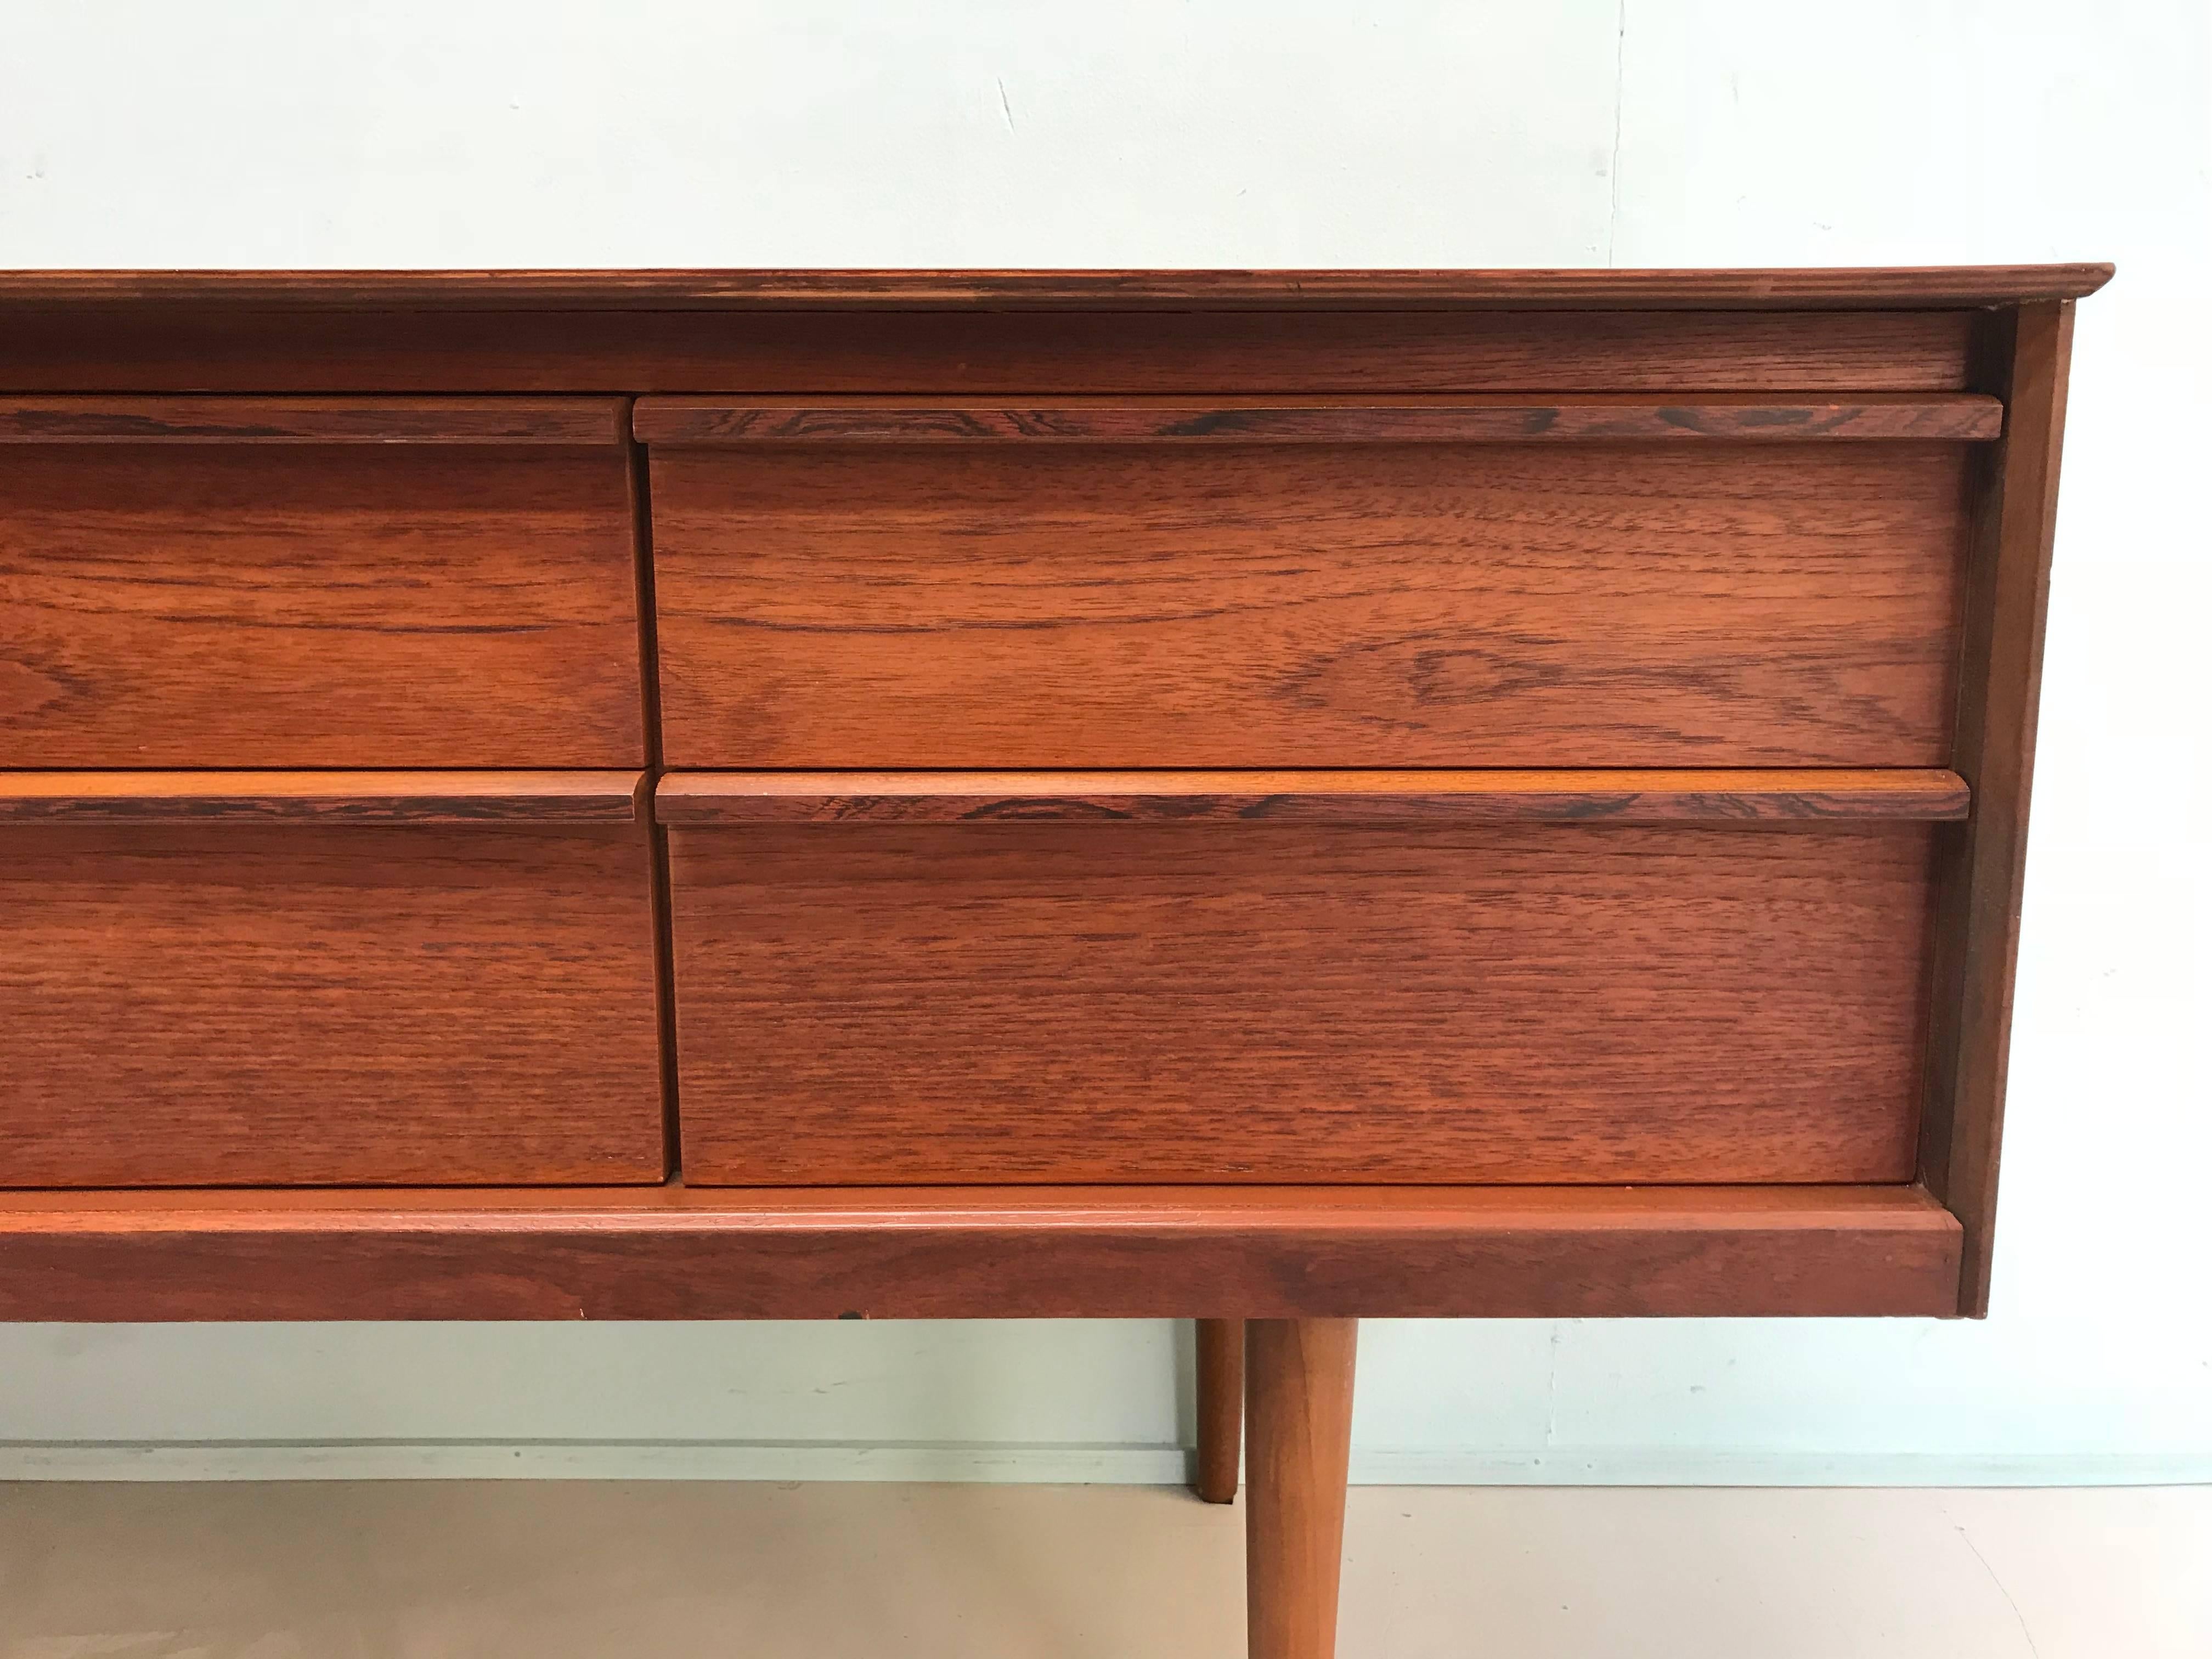 Teak dresser with six drawers made of teak by Austin suite London in the sixties.
Condition: very good.
Measurements:
145 cm W, 42 cm D, 65 cm H.

Itemnr: 240.